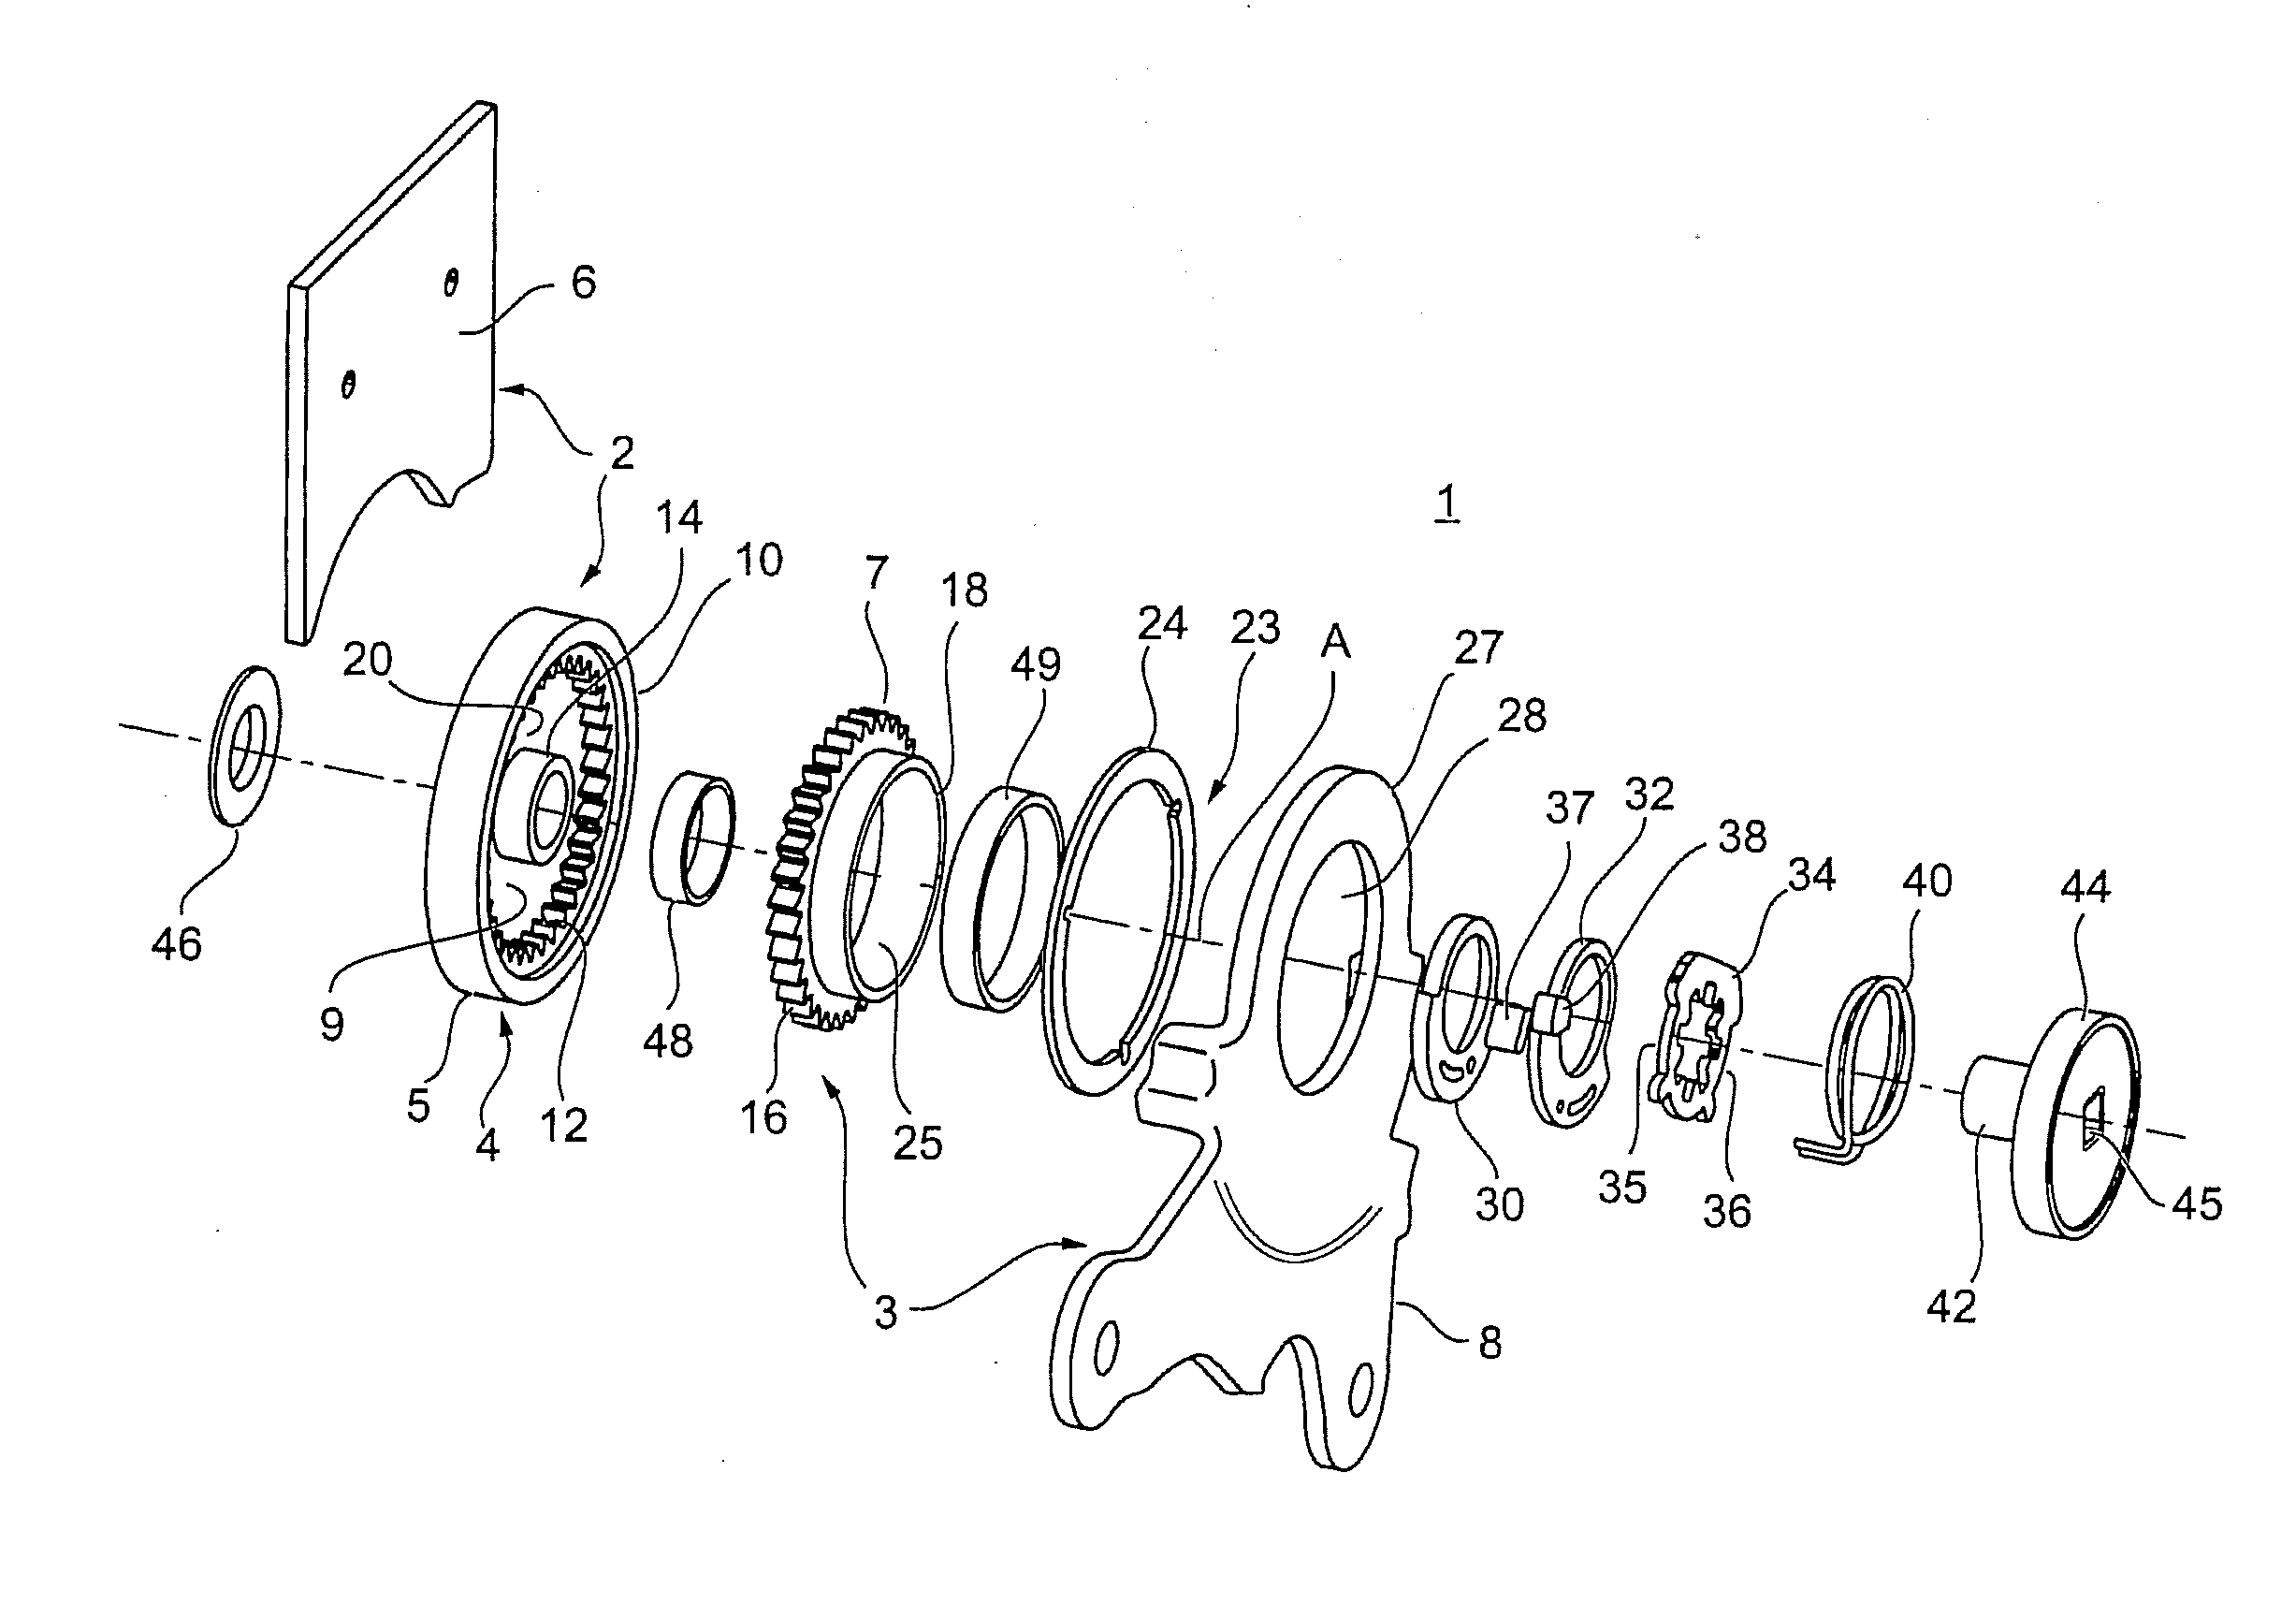 Method for manufacturing an adjustment fitting